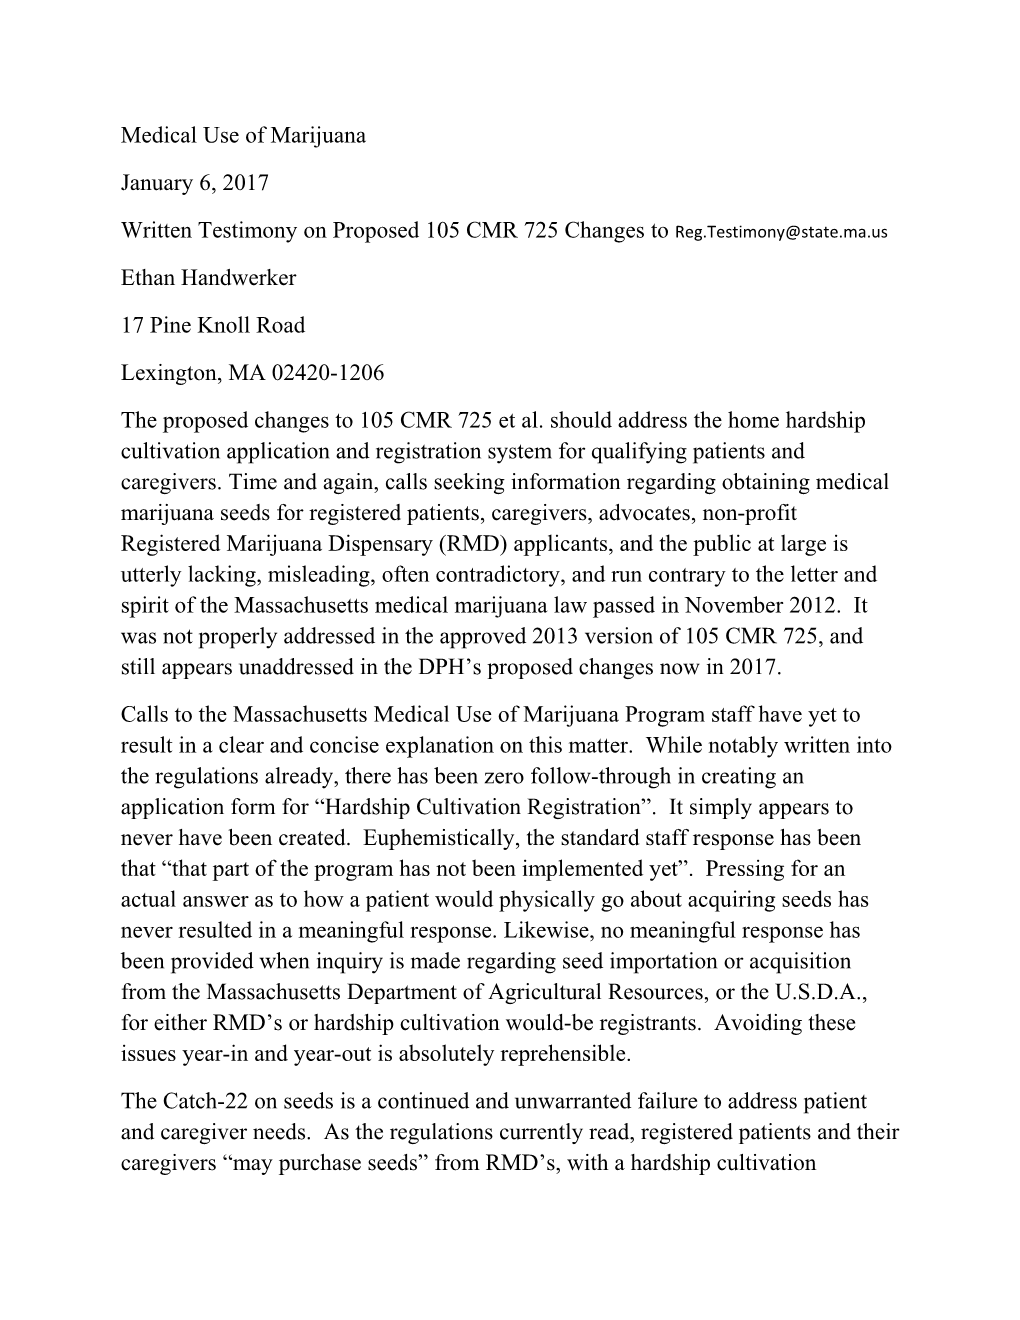 Written Testimony on Proposed 105 CMR 725 Changes To